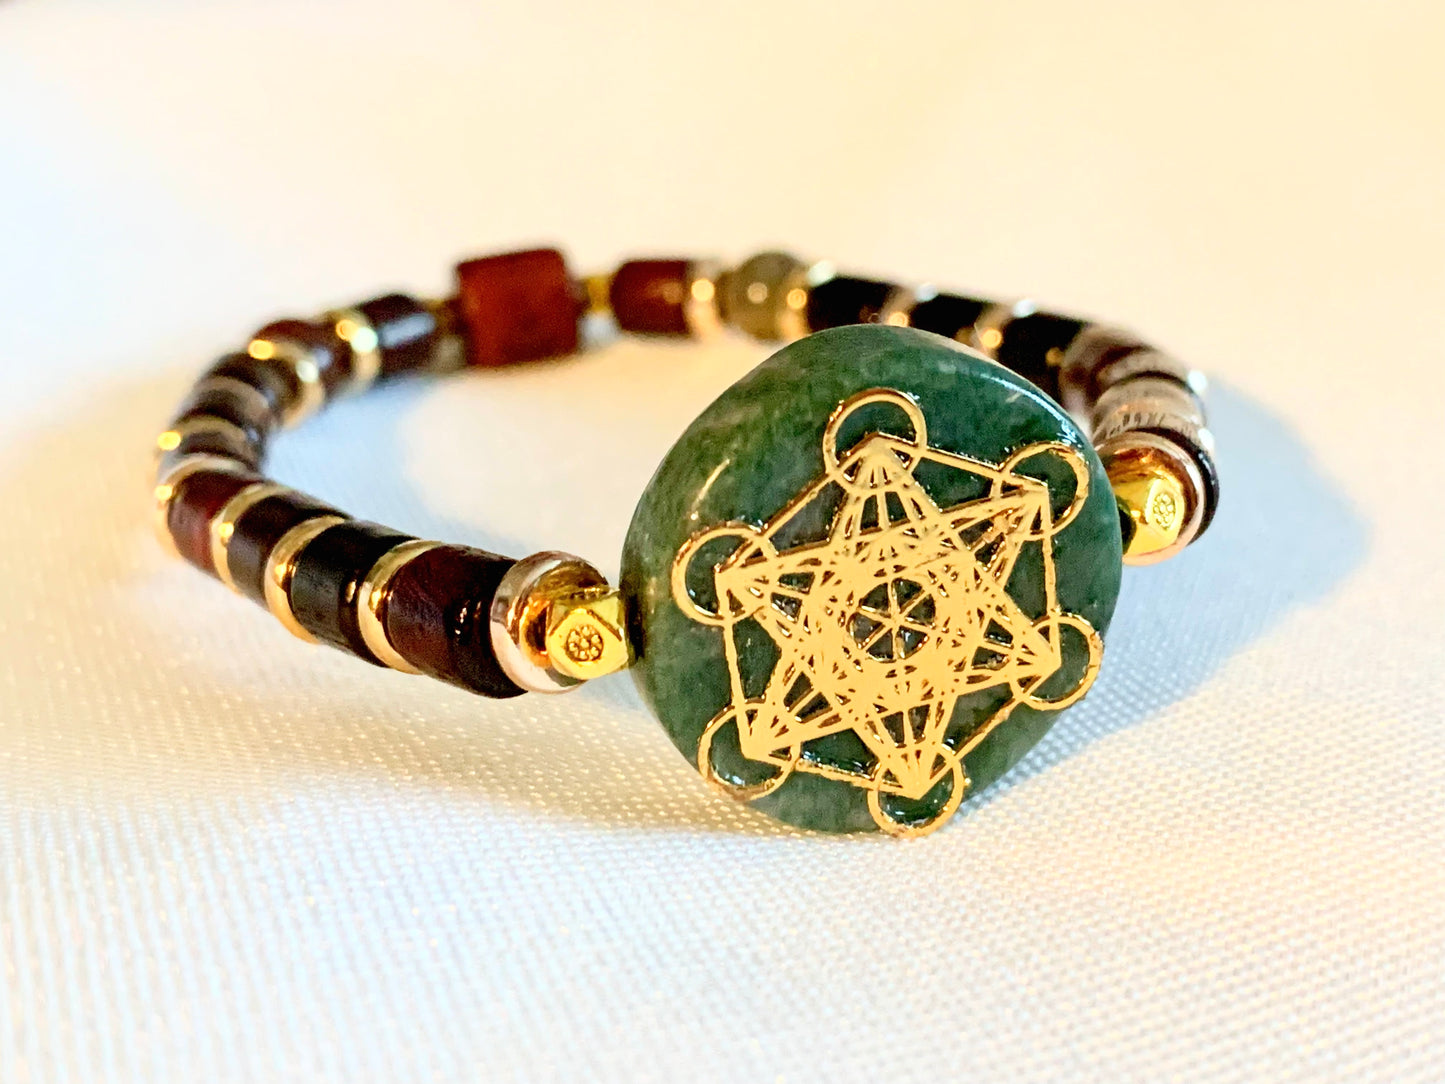 🔴SOLD🔴 Michael Handmade Italian Green Marble, Bloodstone, and Wood Expandable Bracelet